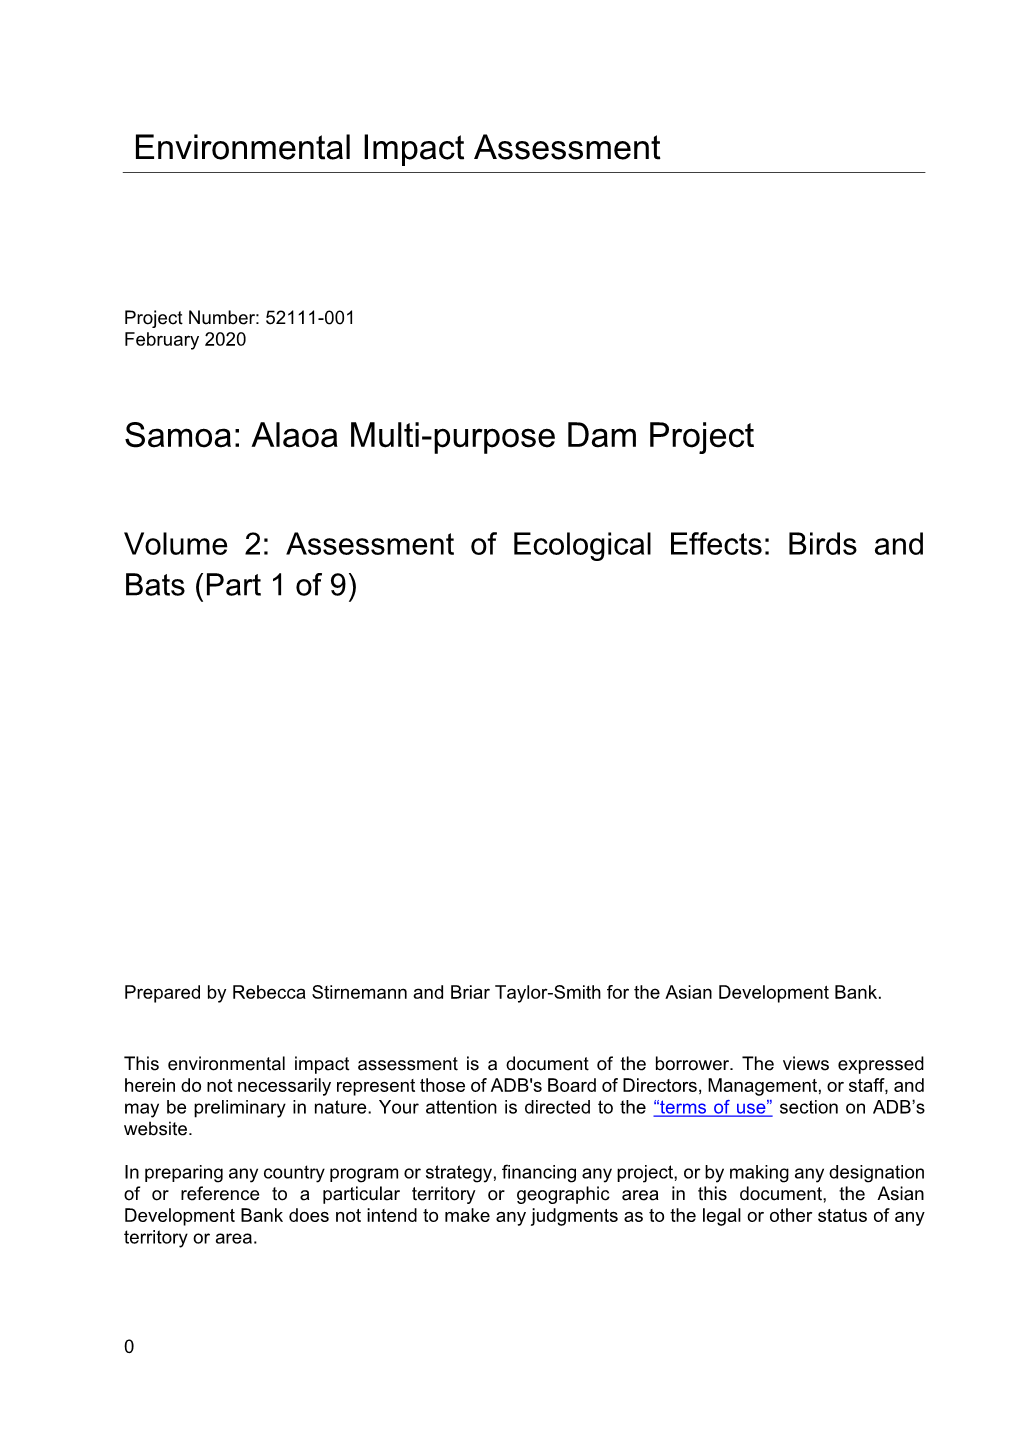 Assessment of Ecological Effects: Birds and Bats (Part 1 of 9)